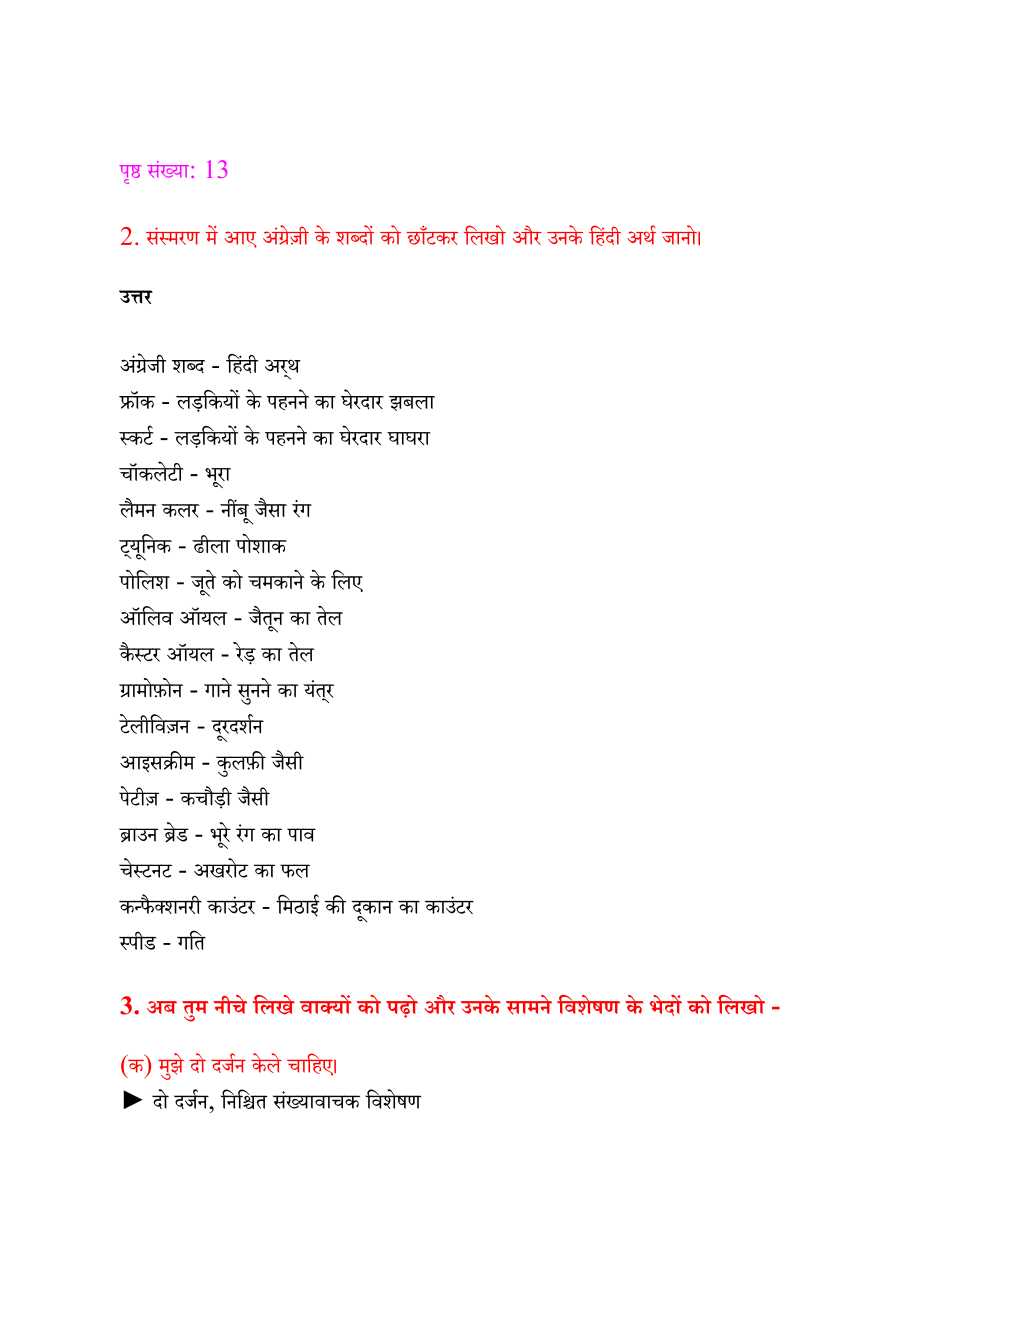 NCERT Solutions For Class 6 Hindi Vasant Chapter 2